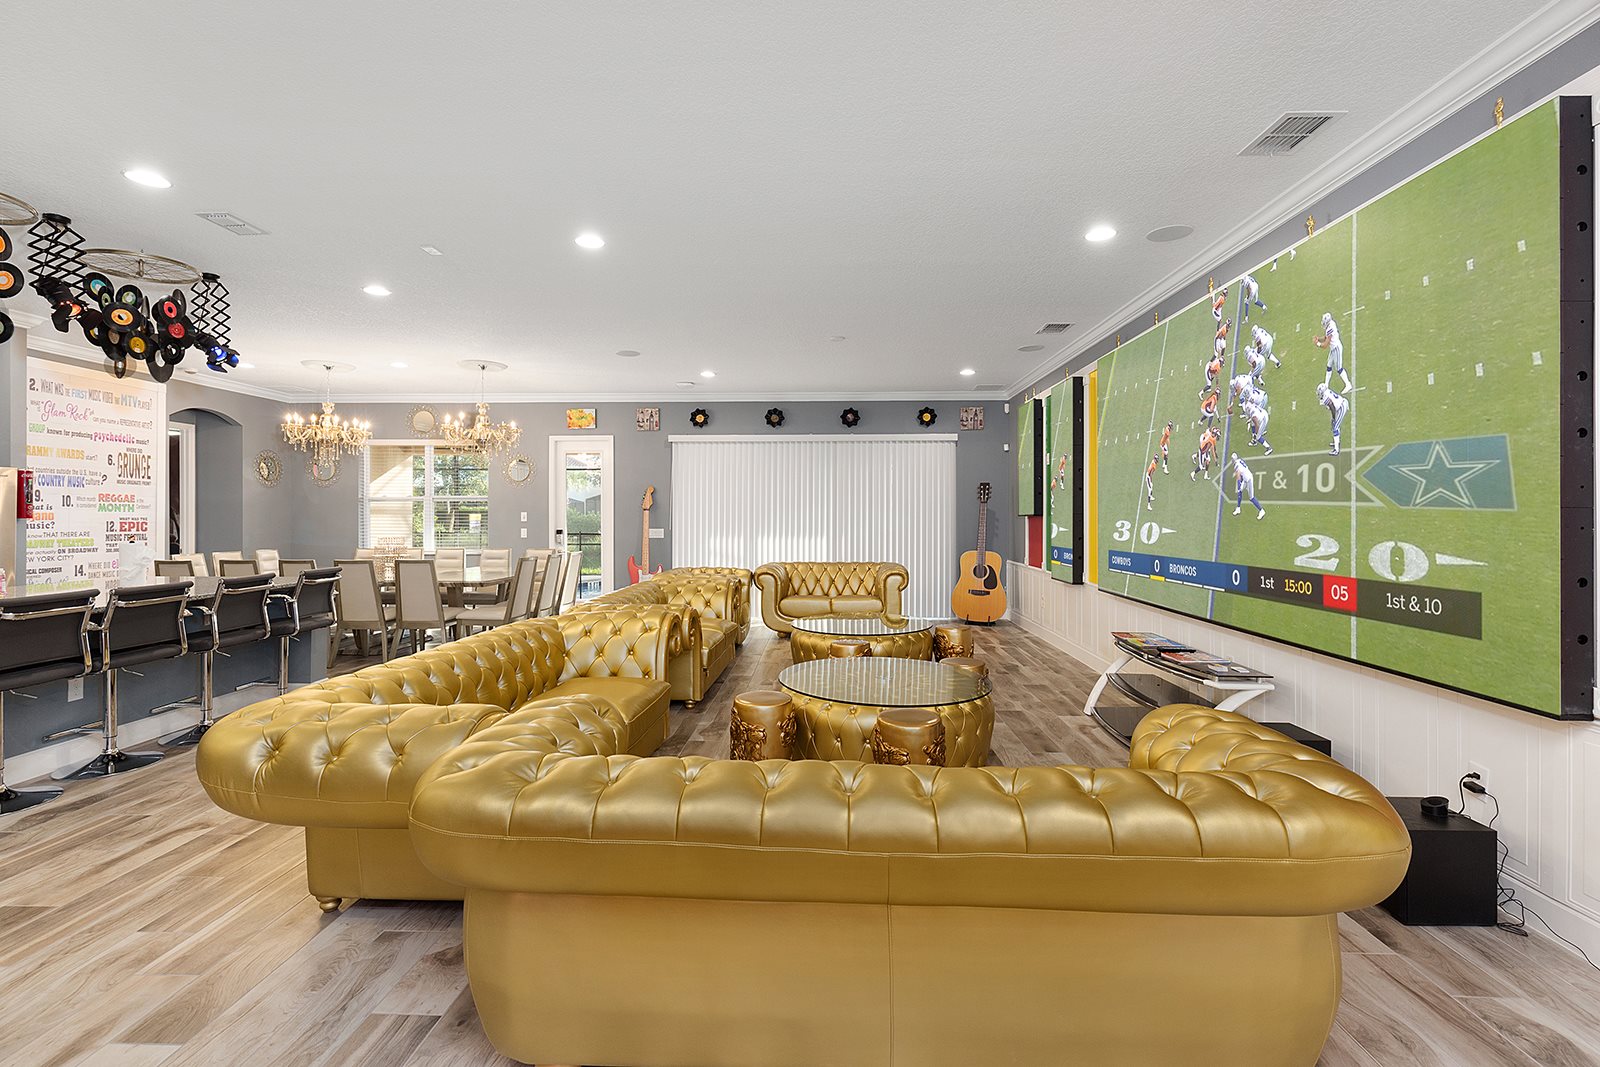 Themed Music City vacation homes with extravagant decor and bowling lanes